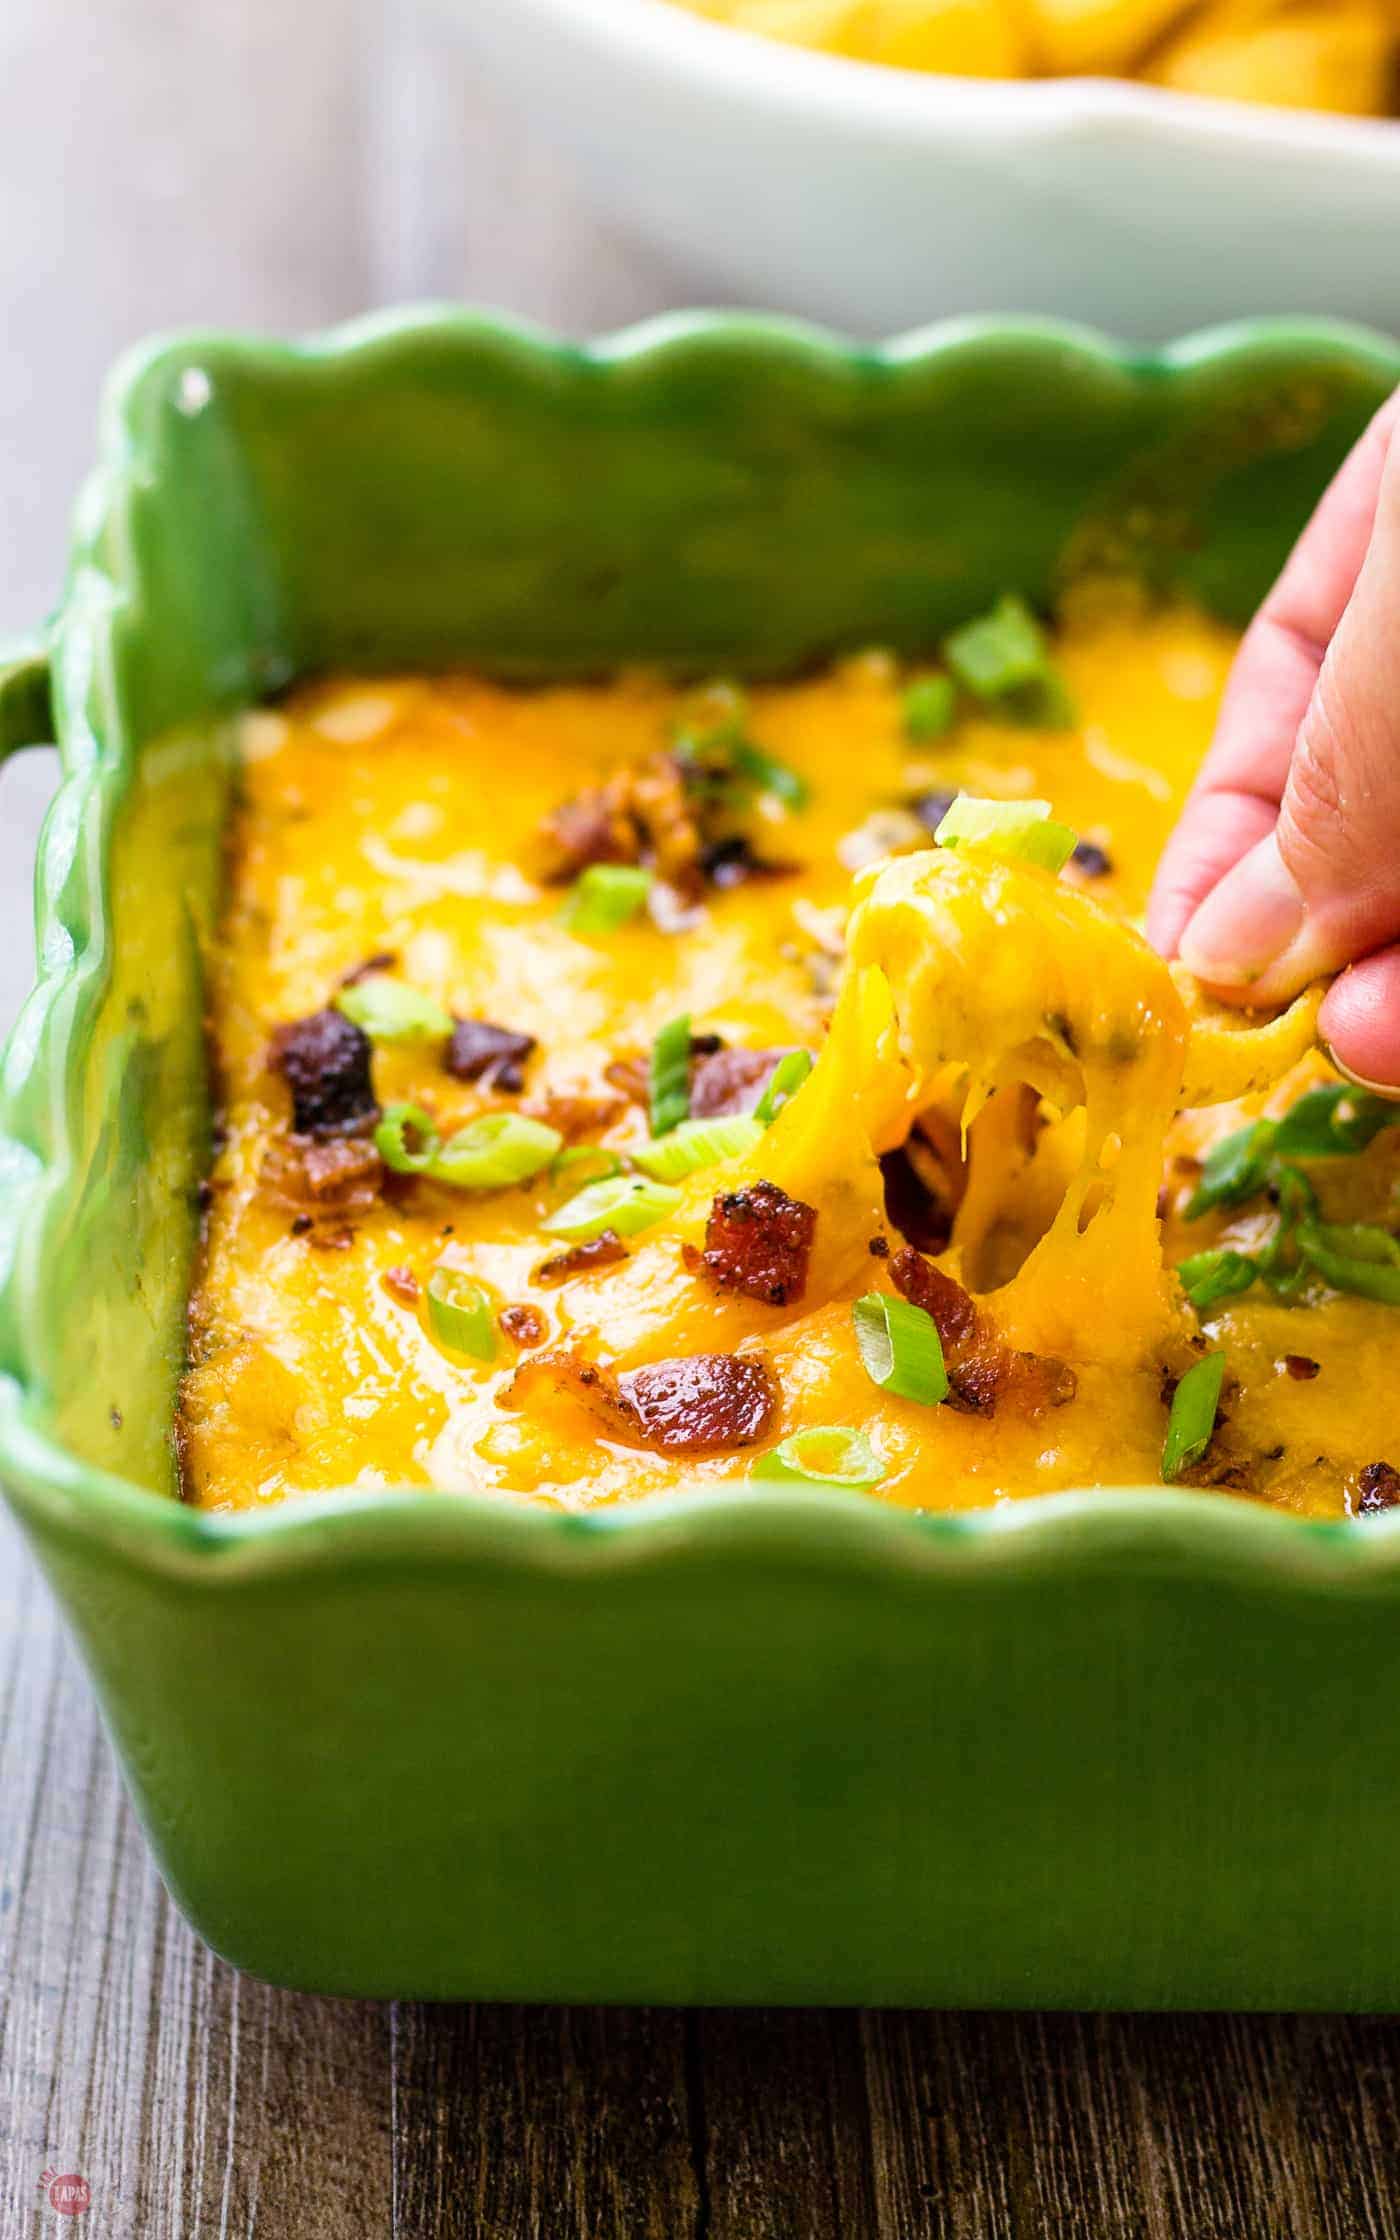 Chicken Bacon Ranch Crock Pot Dip in a green serving dish and a hand dipping a chip in it.